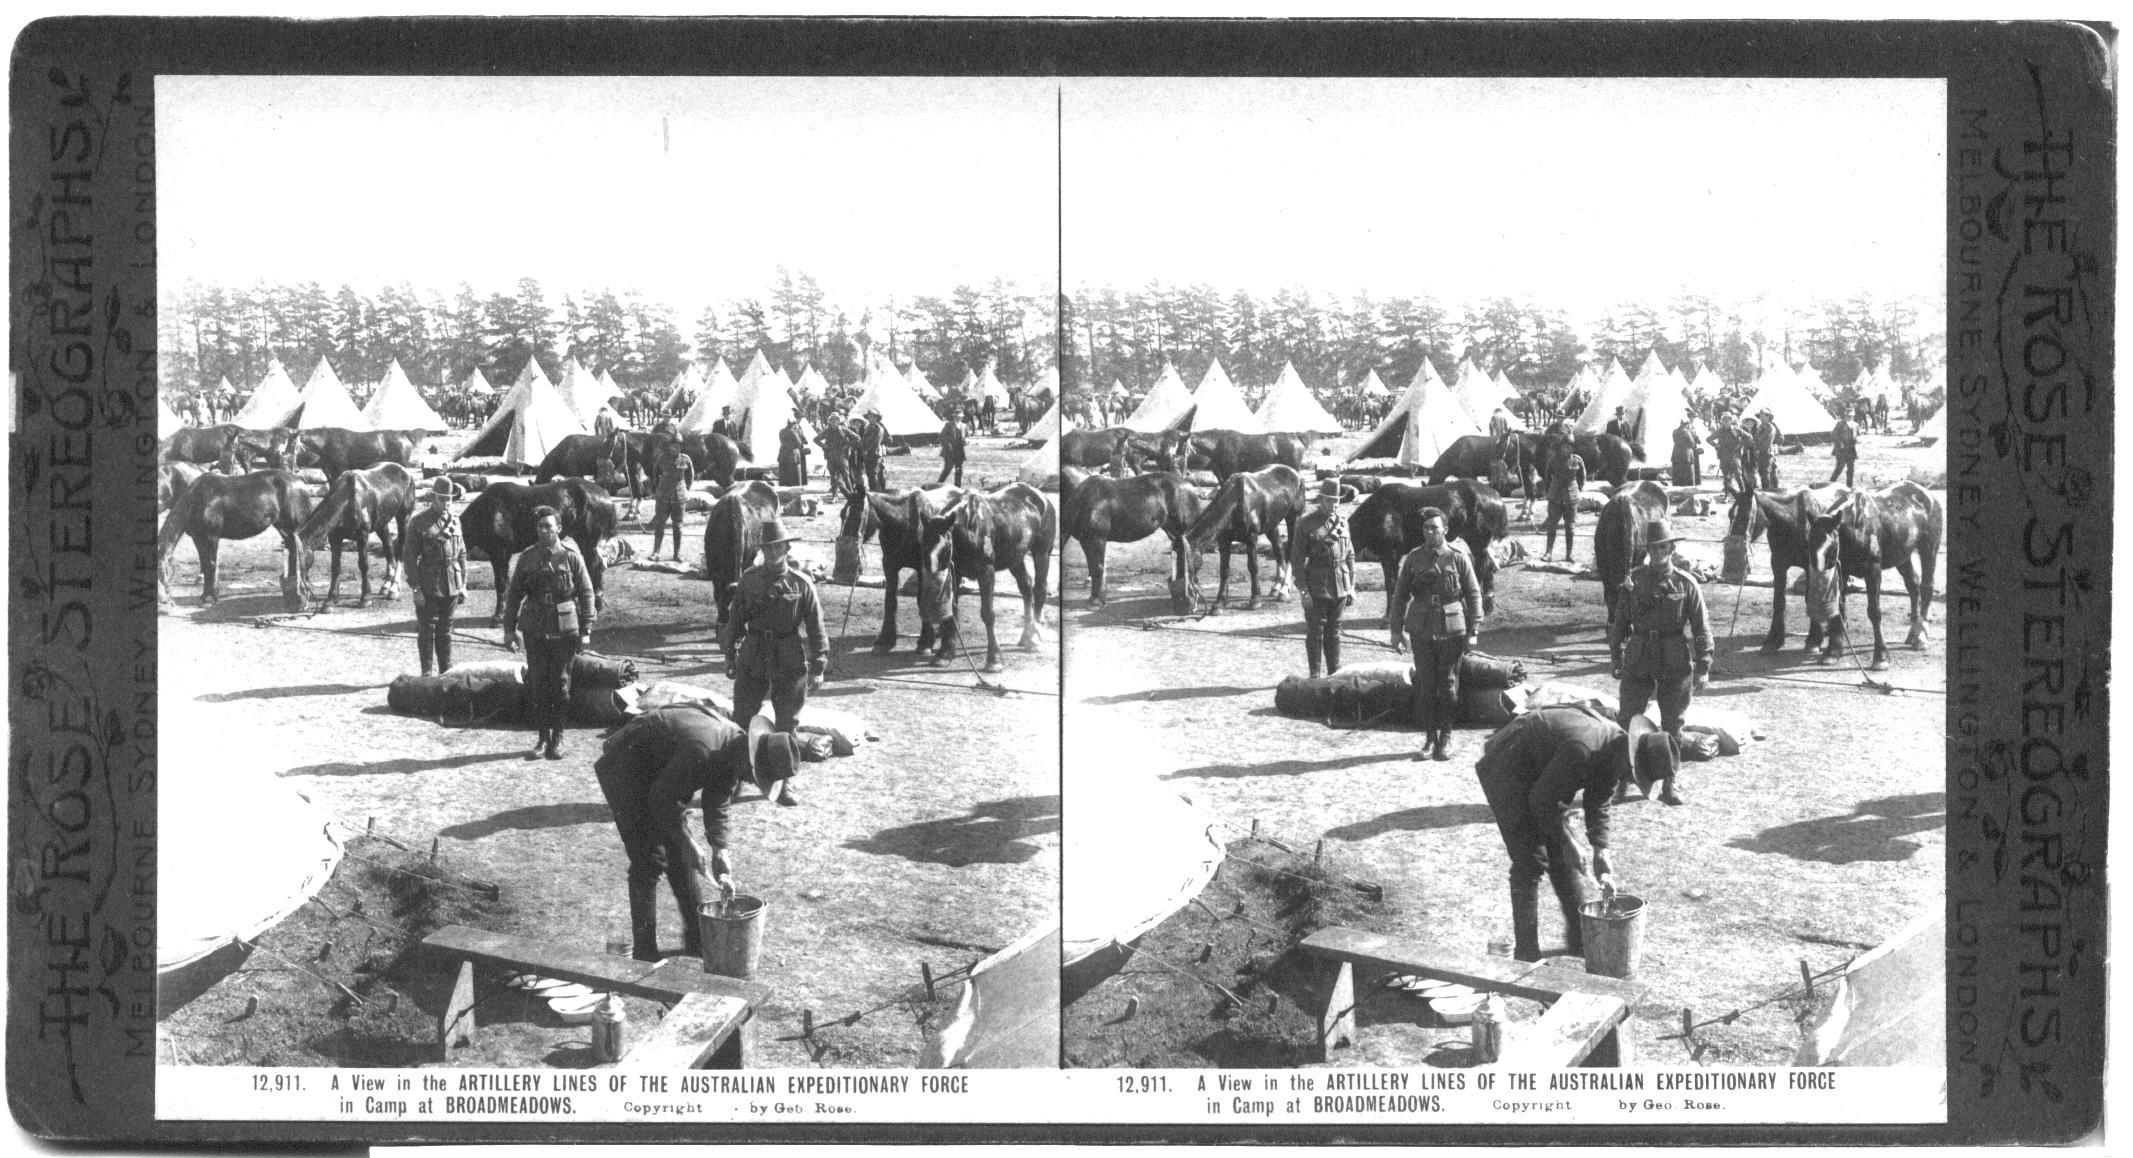 A View in the ARTILLERY LINES OF THE AUSTRALIAN EXPEDITIONARY FORCE in camp at BROADMEADOWS.